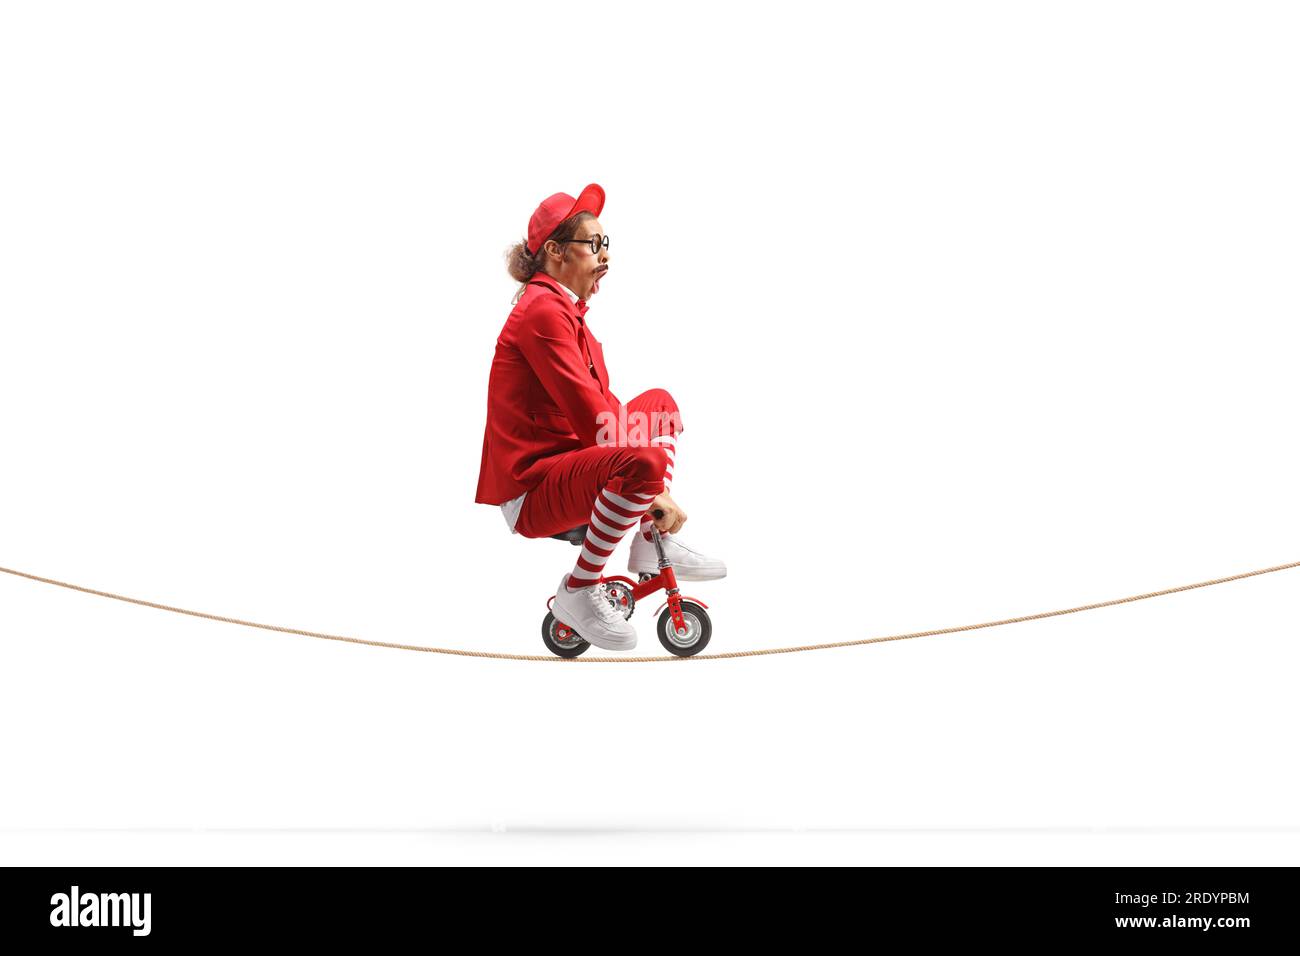 Man in a red suit riding a small red bike on a rope isolated on white background Stock Photo